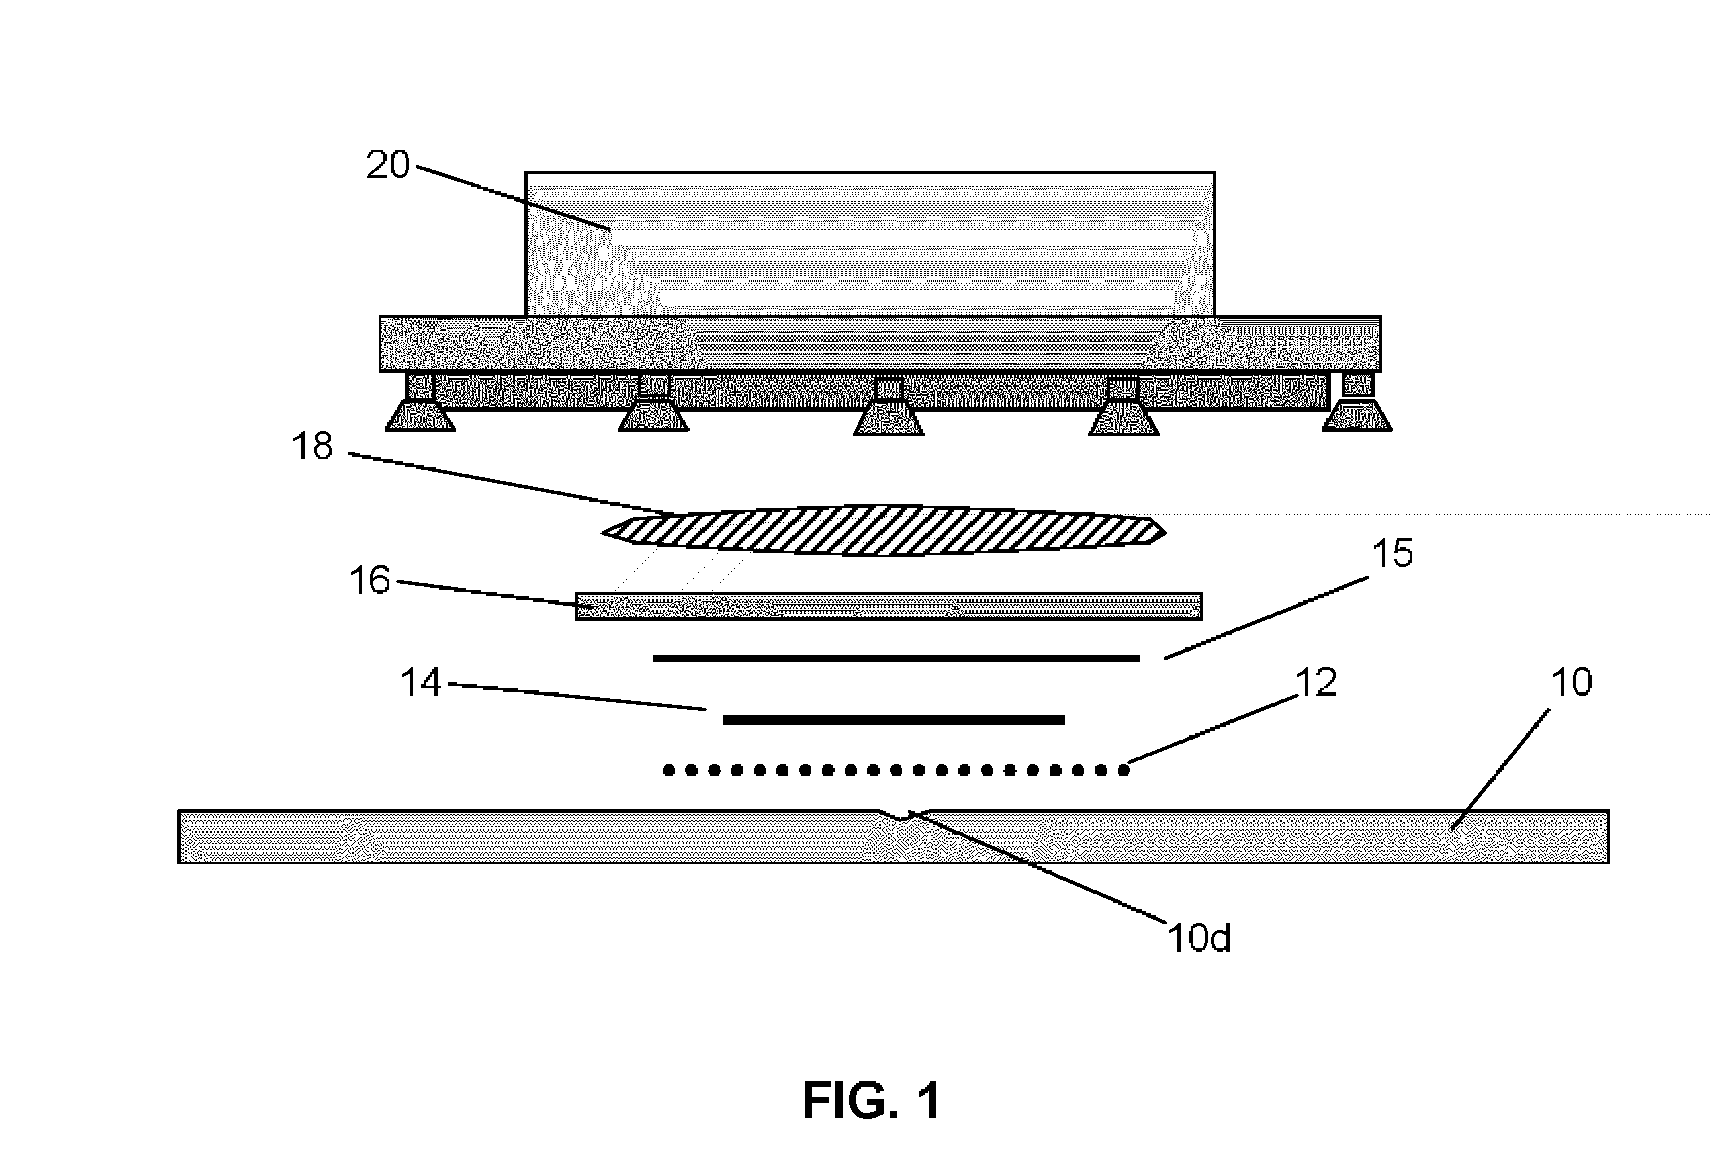 Fast line maintenance repair method and system for composite structures